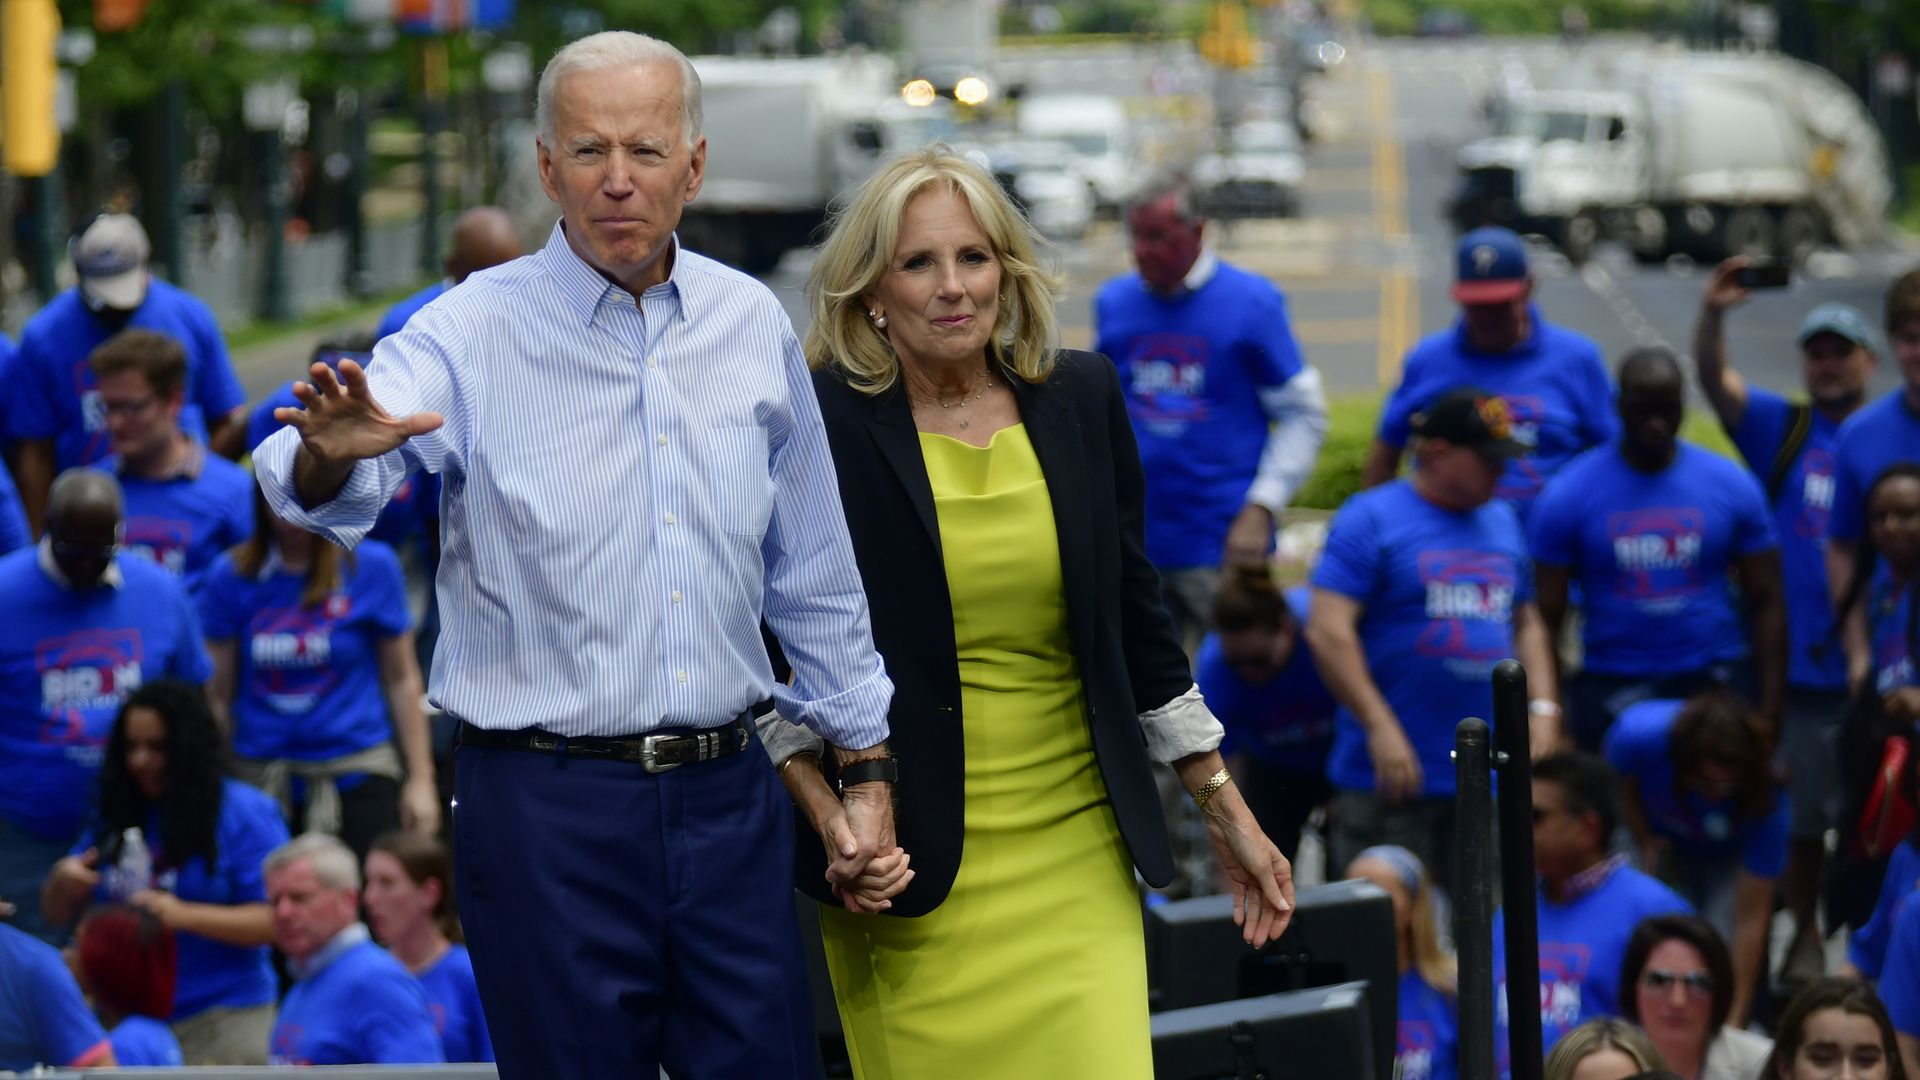 Philadelphia Joe and Jill Biden share the stage as former Vice President kicks off his 2020 campaign at an outdoor rally on the Benjamin Franklin Parkway in Philadelphia